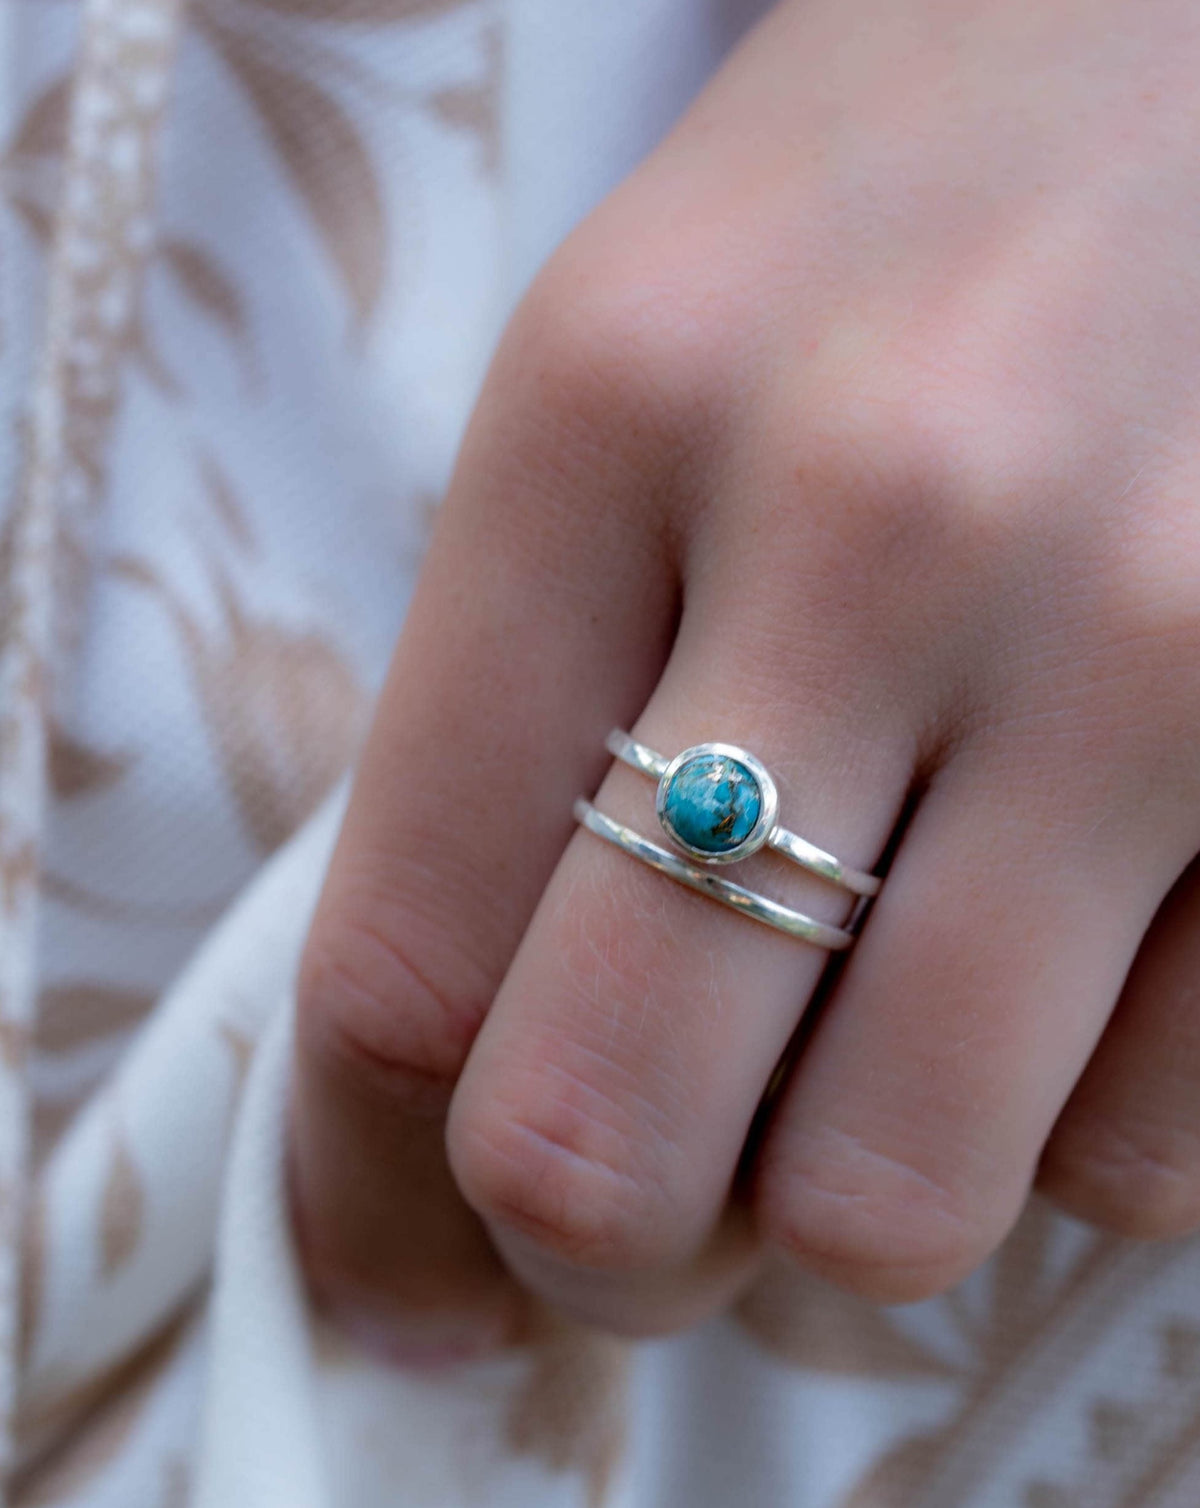 Turquoise Ring* Silver Ring * Boho Ring* Blue Ring * Gypsy Ring * Handmade * Hippie * Sterling Silver Ring * Copper Turquoise Jewelry*BJR104